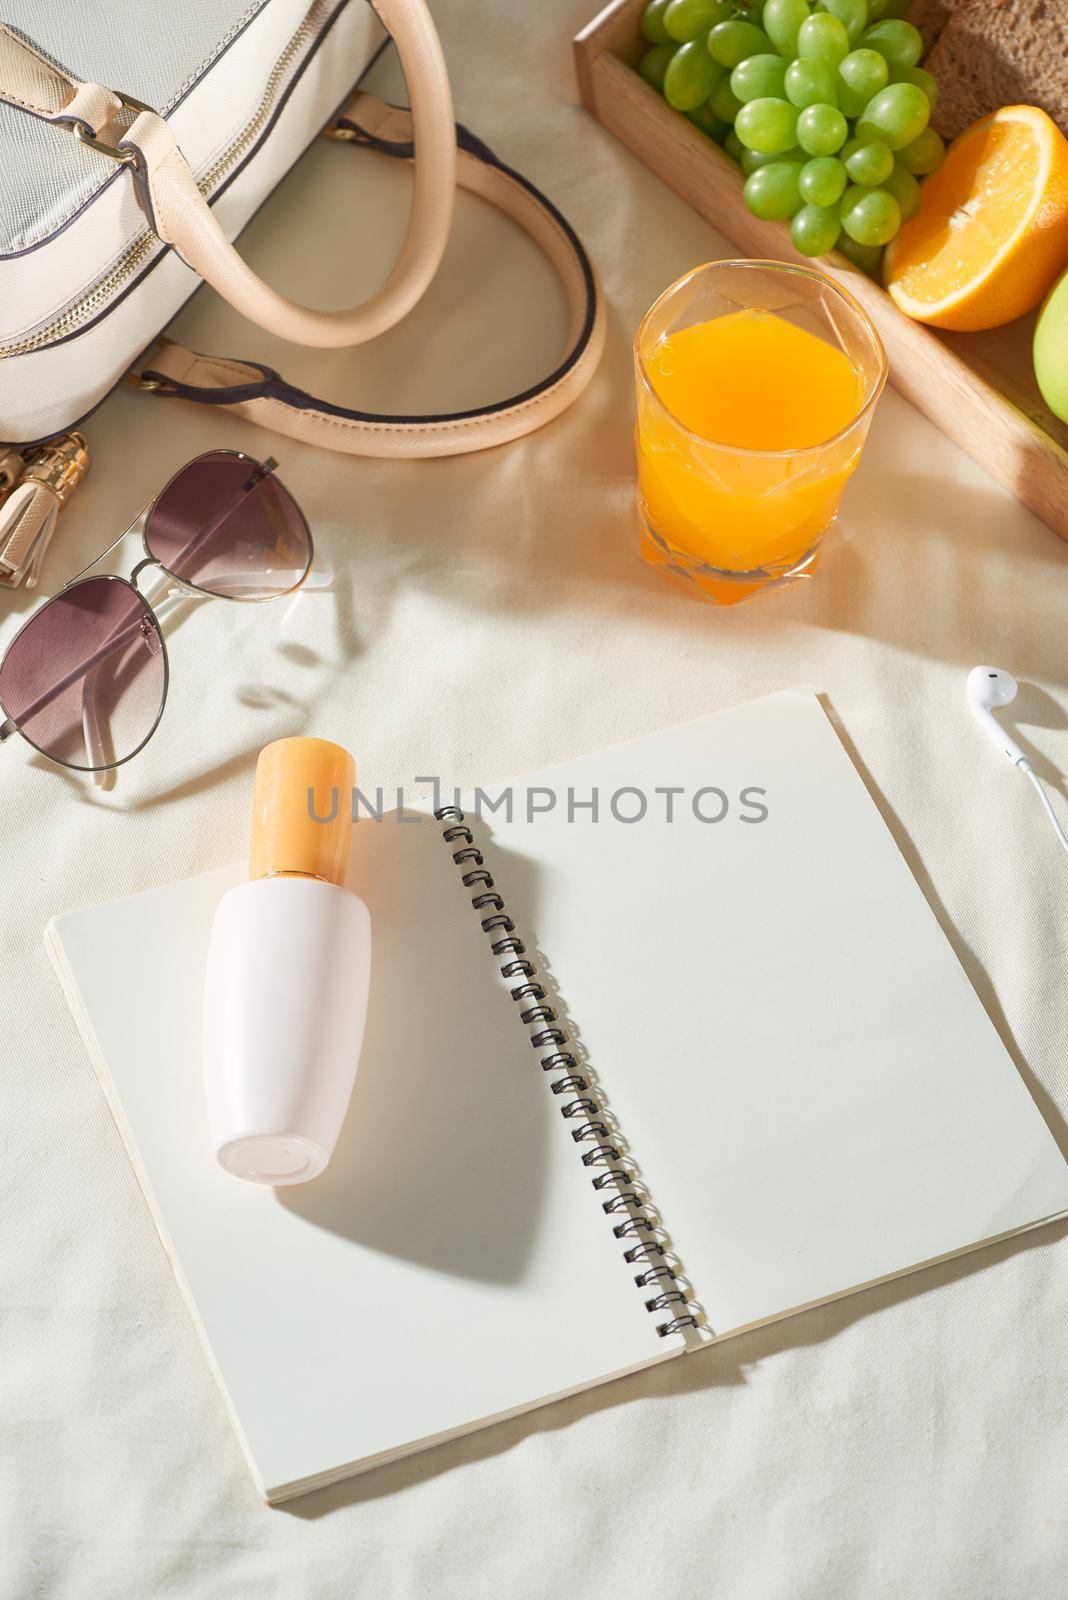 Summer holiday with bag, fruit, sun cream, glasses, accessories on white background